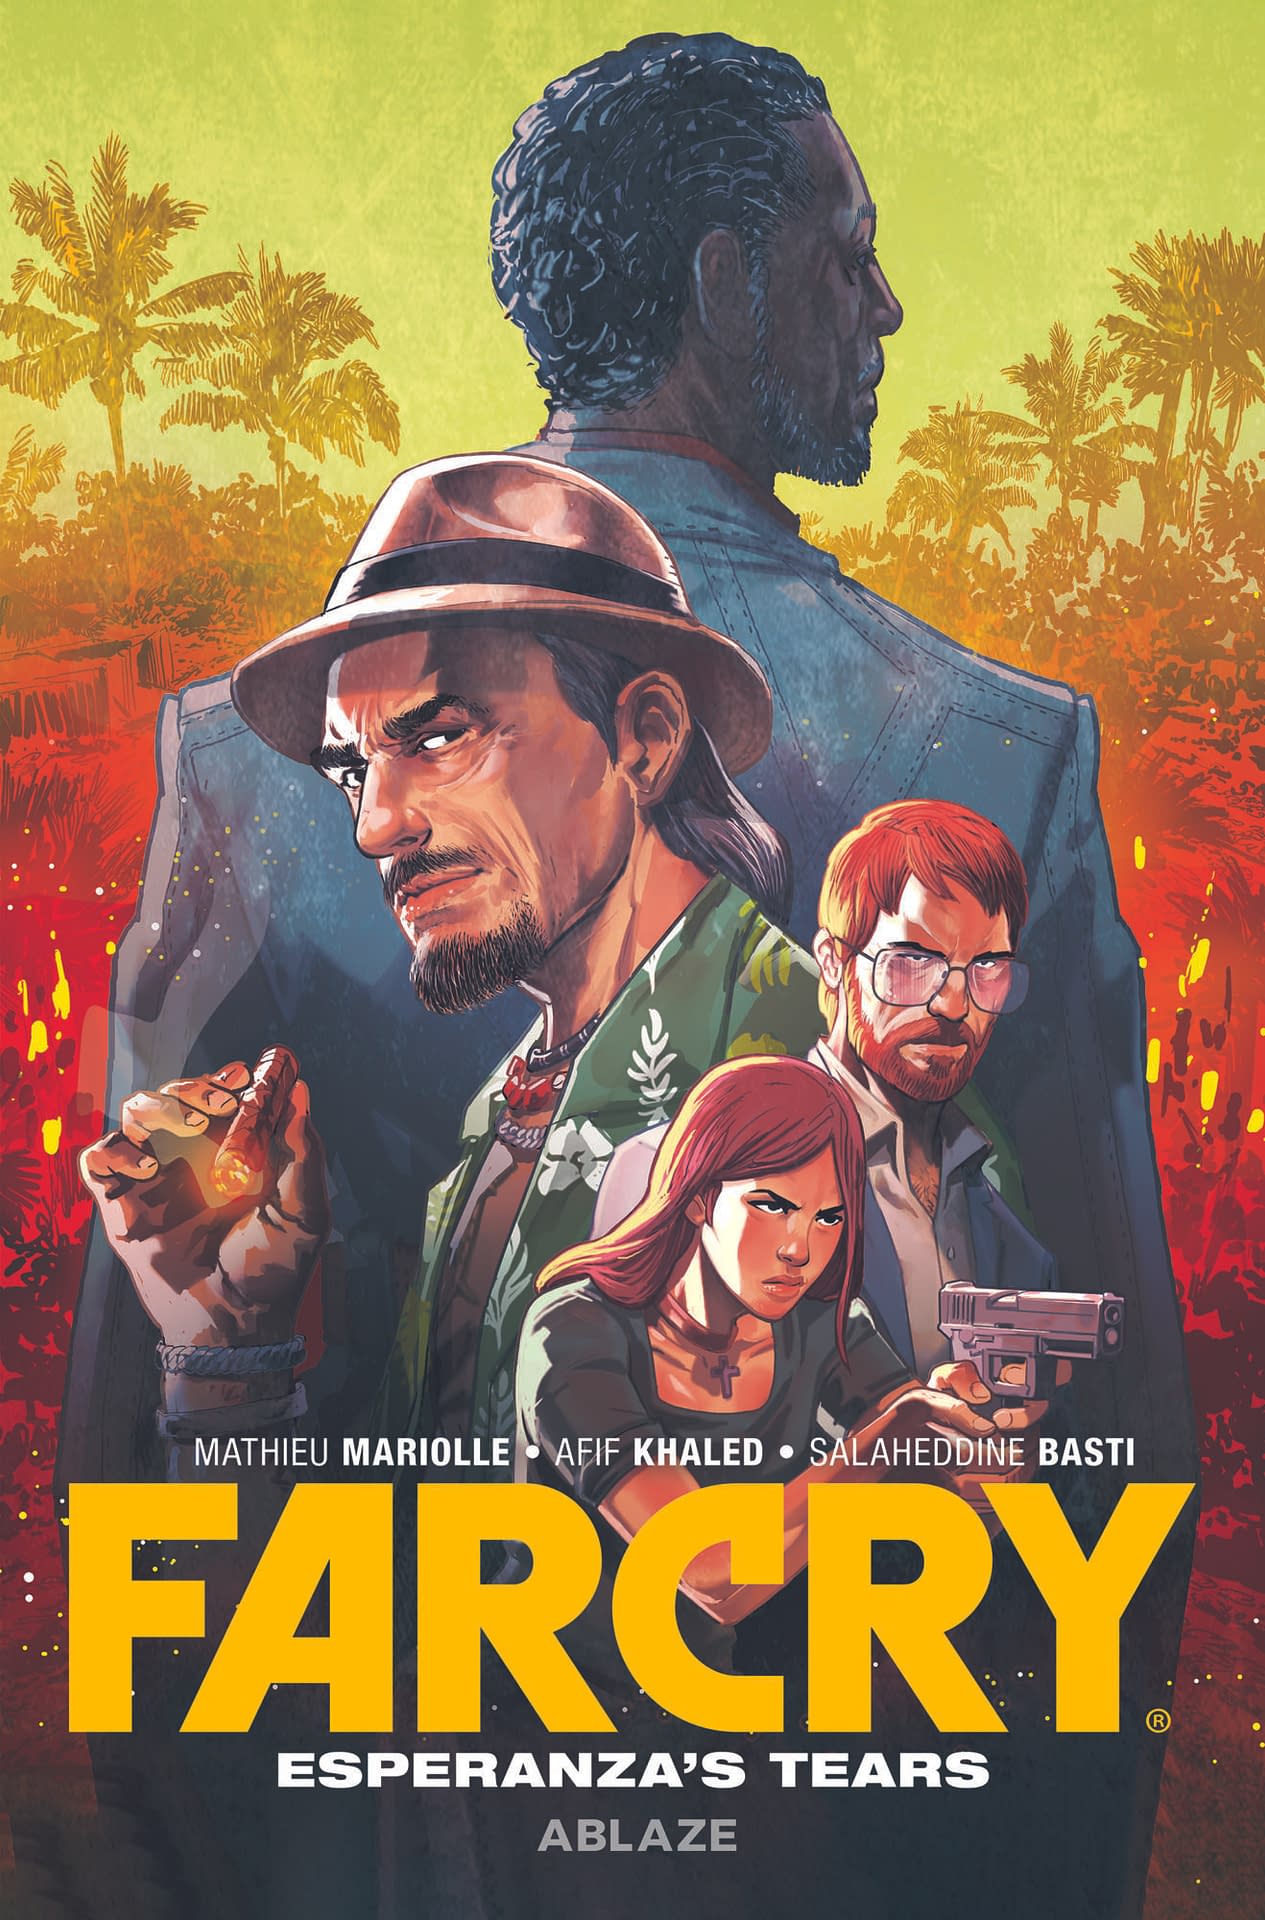 Play Far Cry 6 for free in March 2022